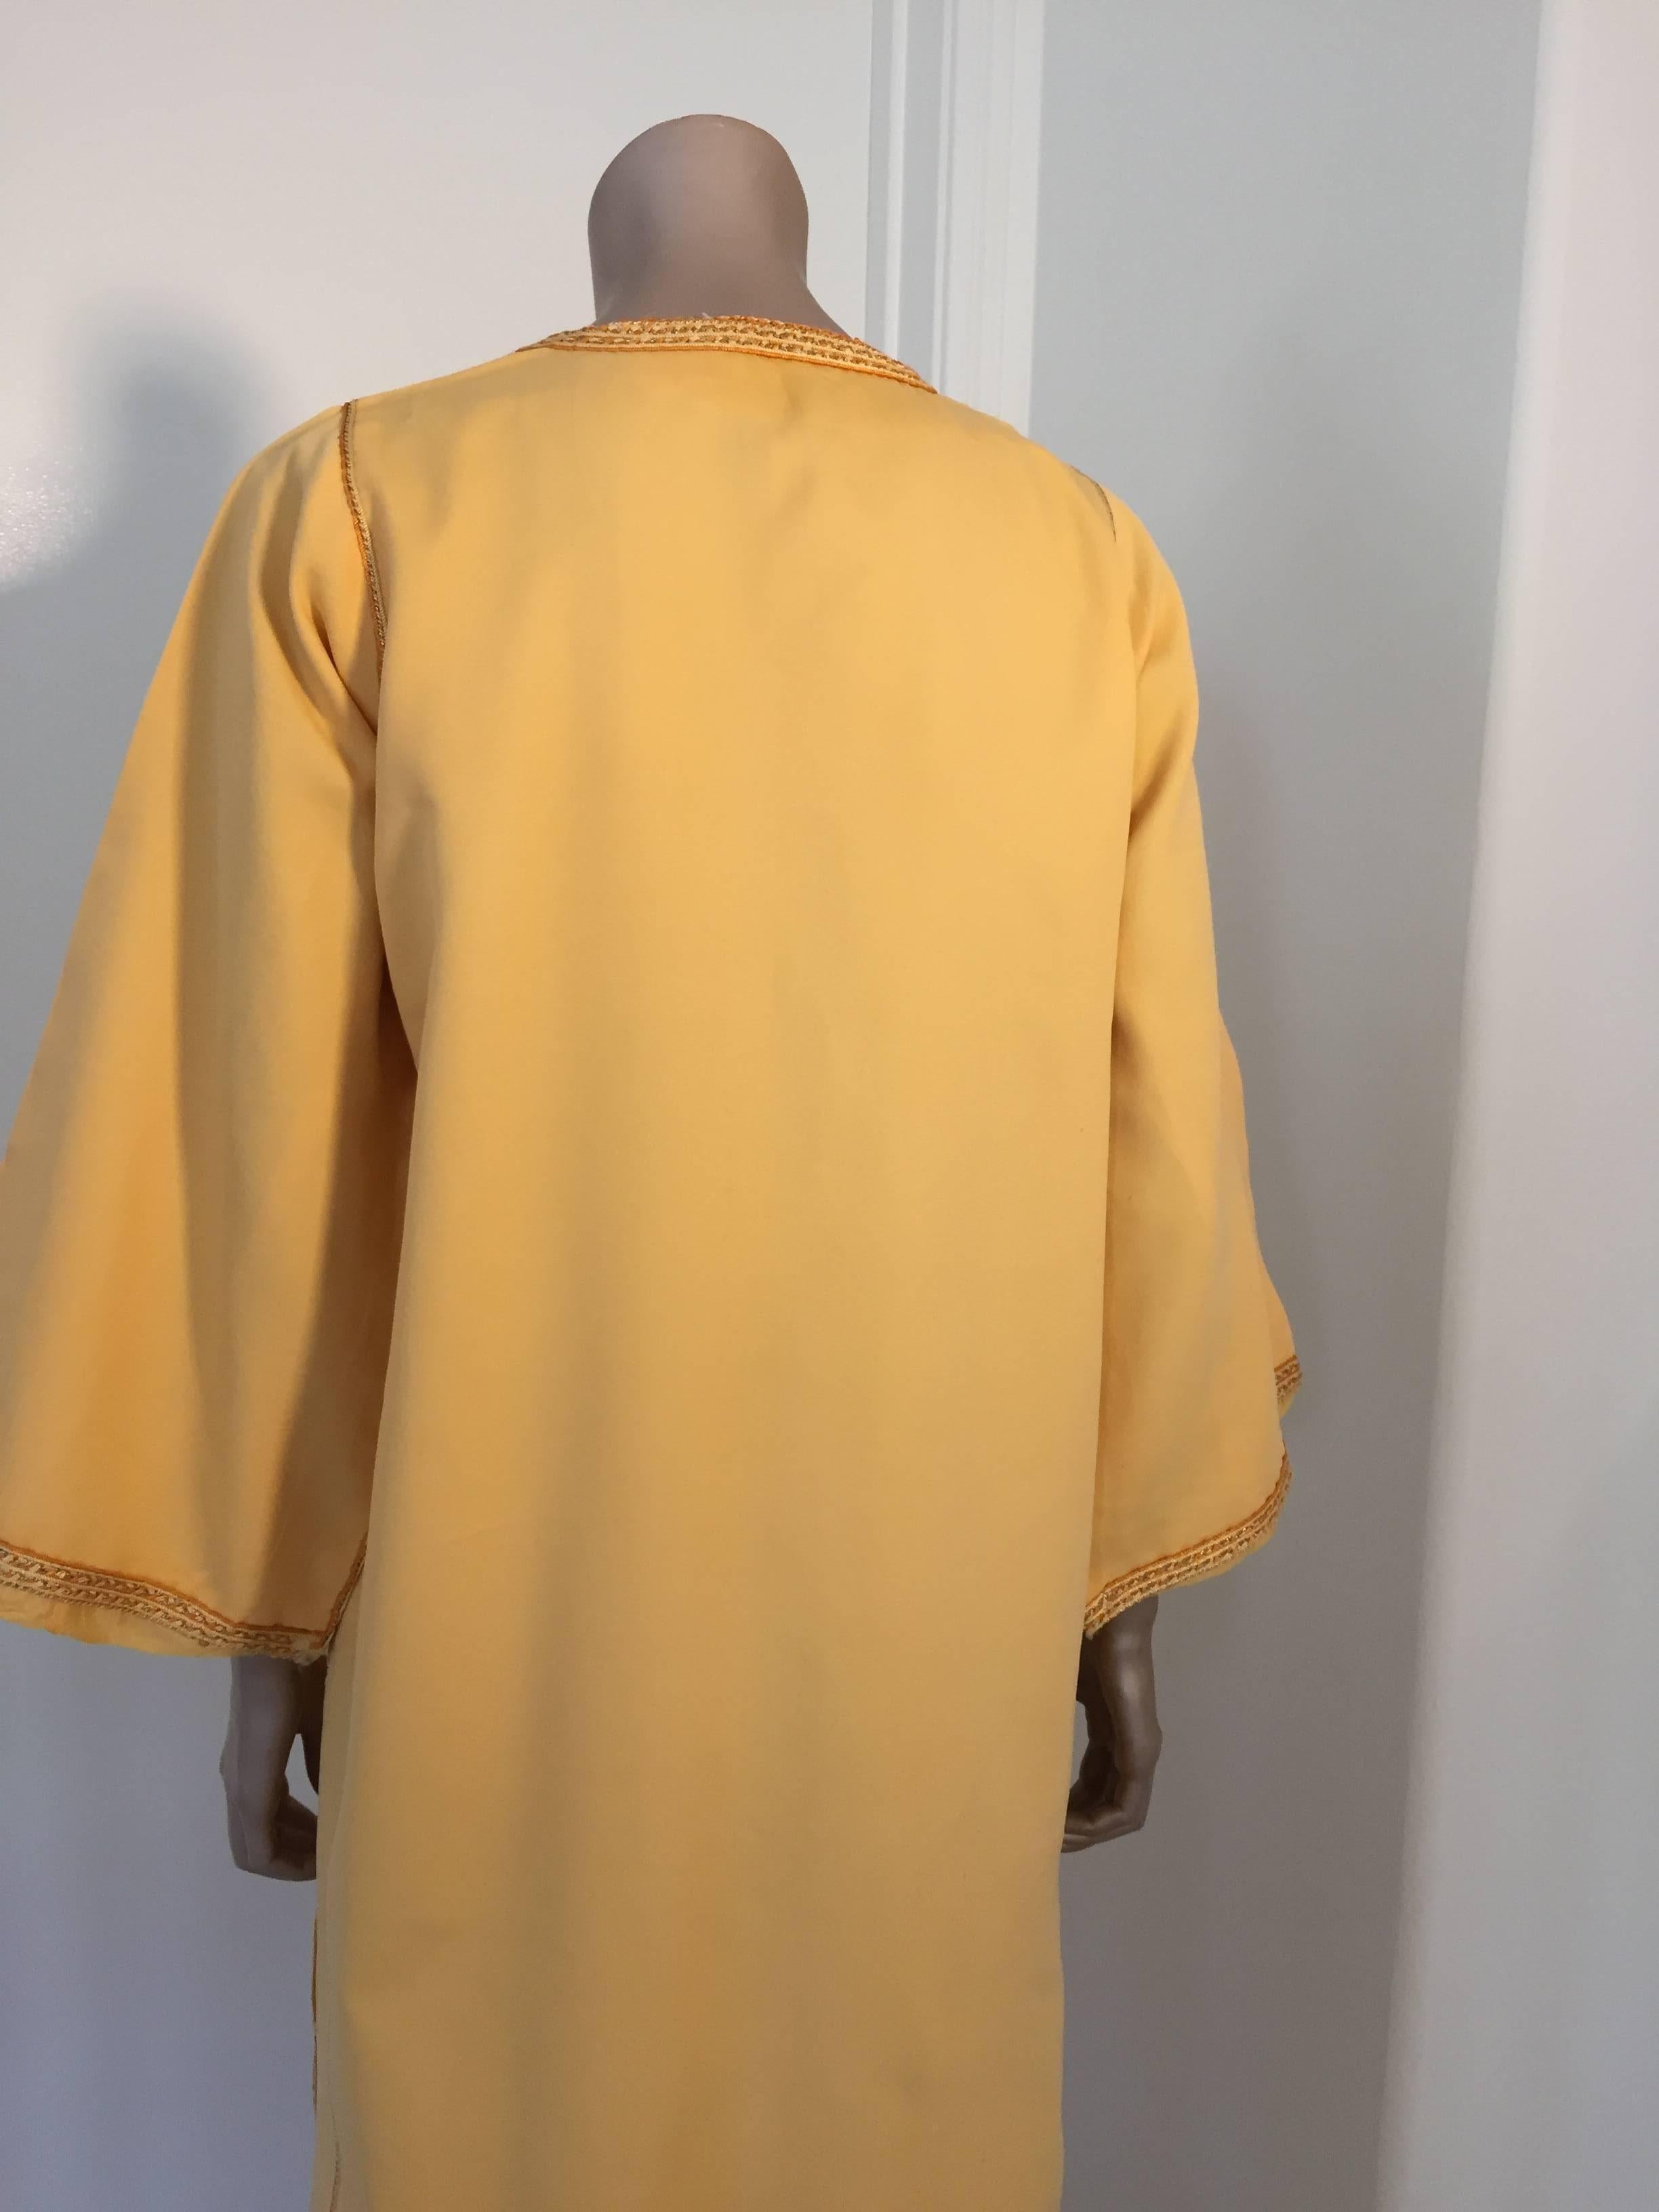 Moroccan Vintage Yellow Gold Caftan For Sale 4